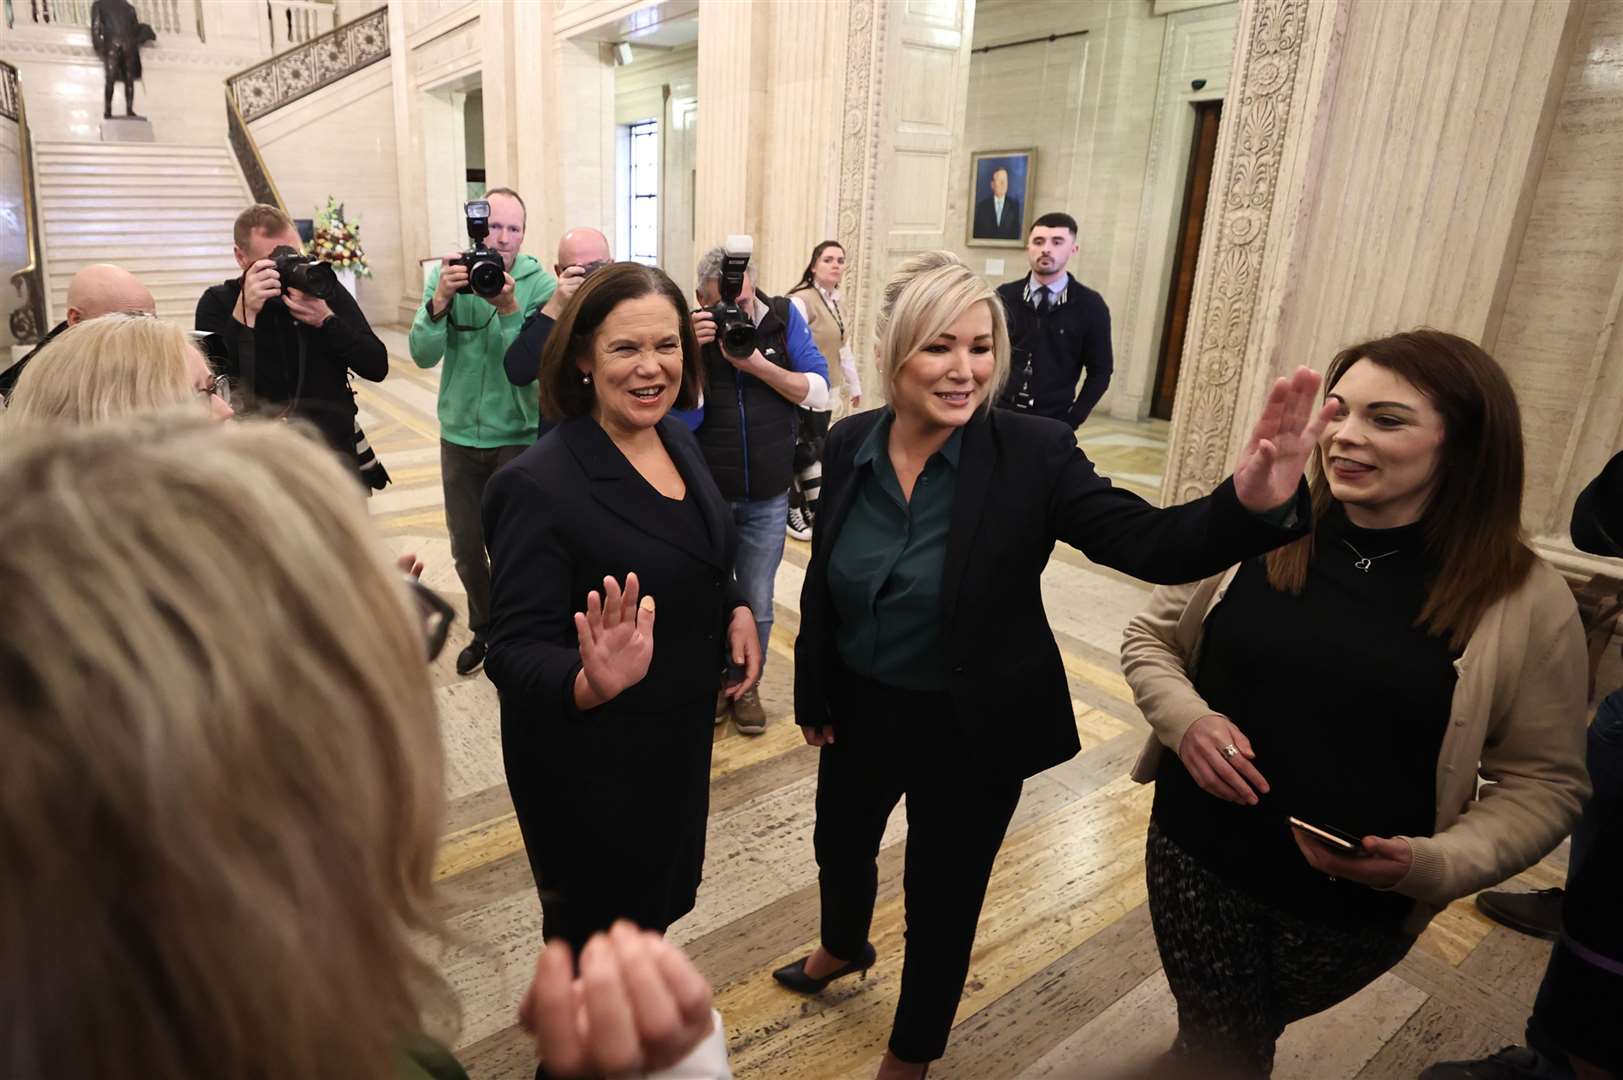 Sinn Fein president Mary Lou McDonald (centre) and vice president Michelle O’Neill wave after speaking to students from Mount Lourdes Grammar in Enniskillen at Stormont (Liam McBurney/PA)